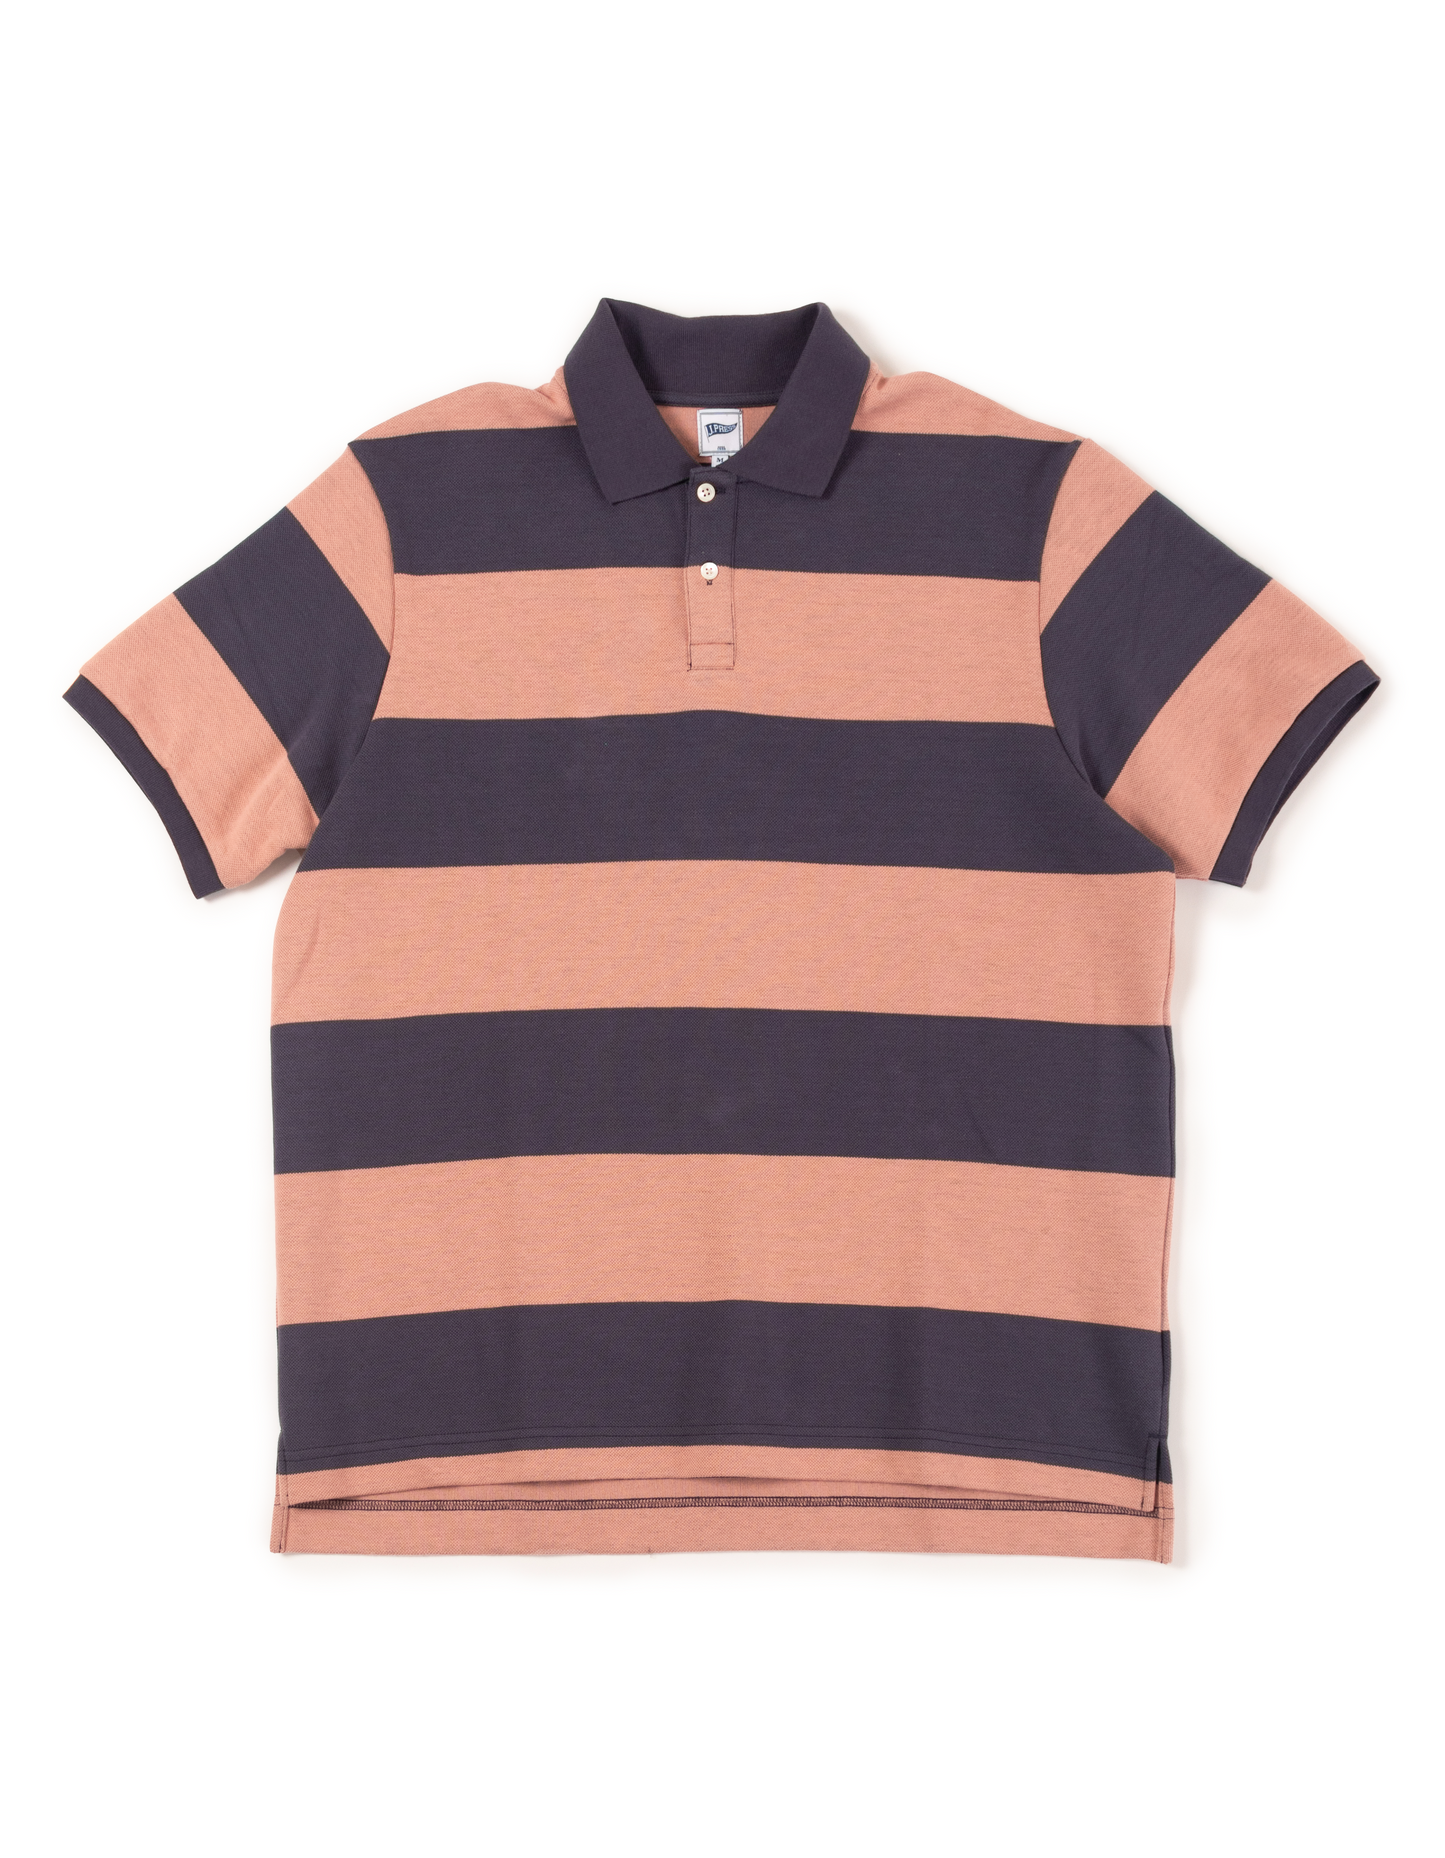 RELAXED FIT WIDE STRIPE POLO - NAVY/PINK